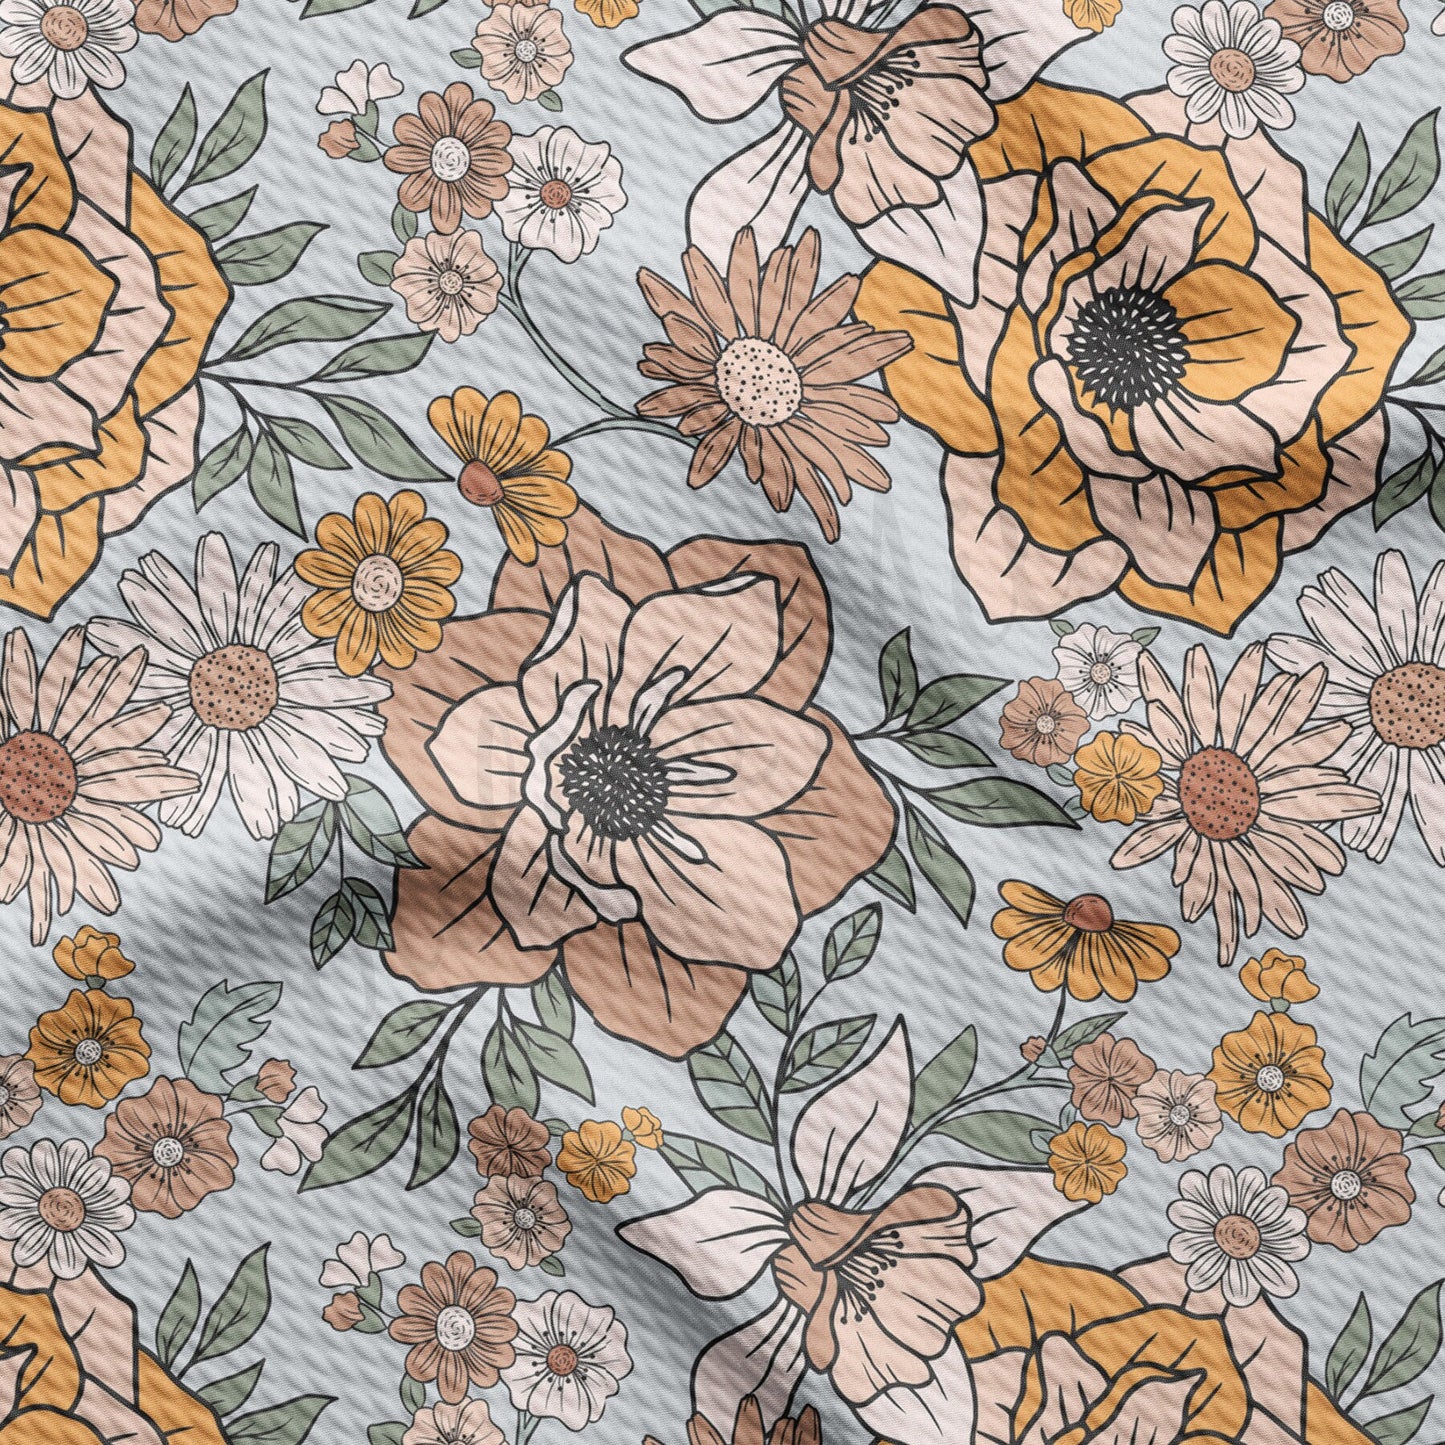 Floral  Bullet Textured Fabric by the yard AA1606